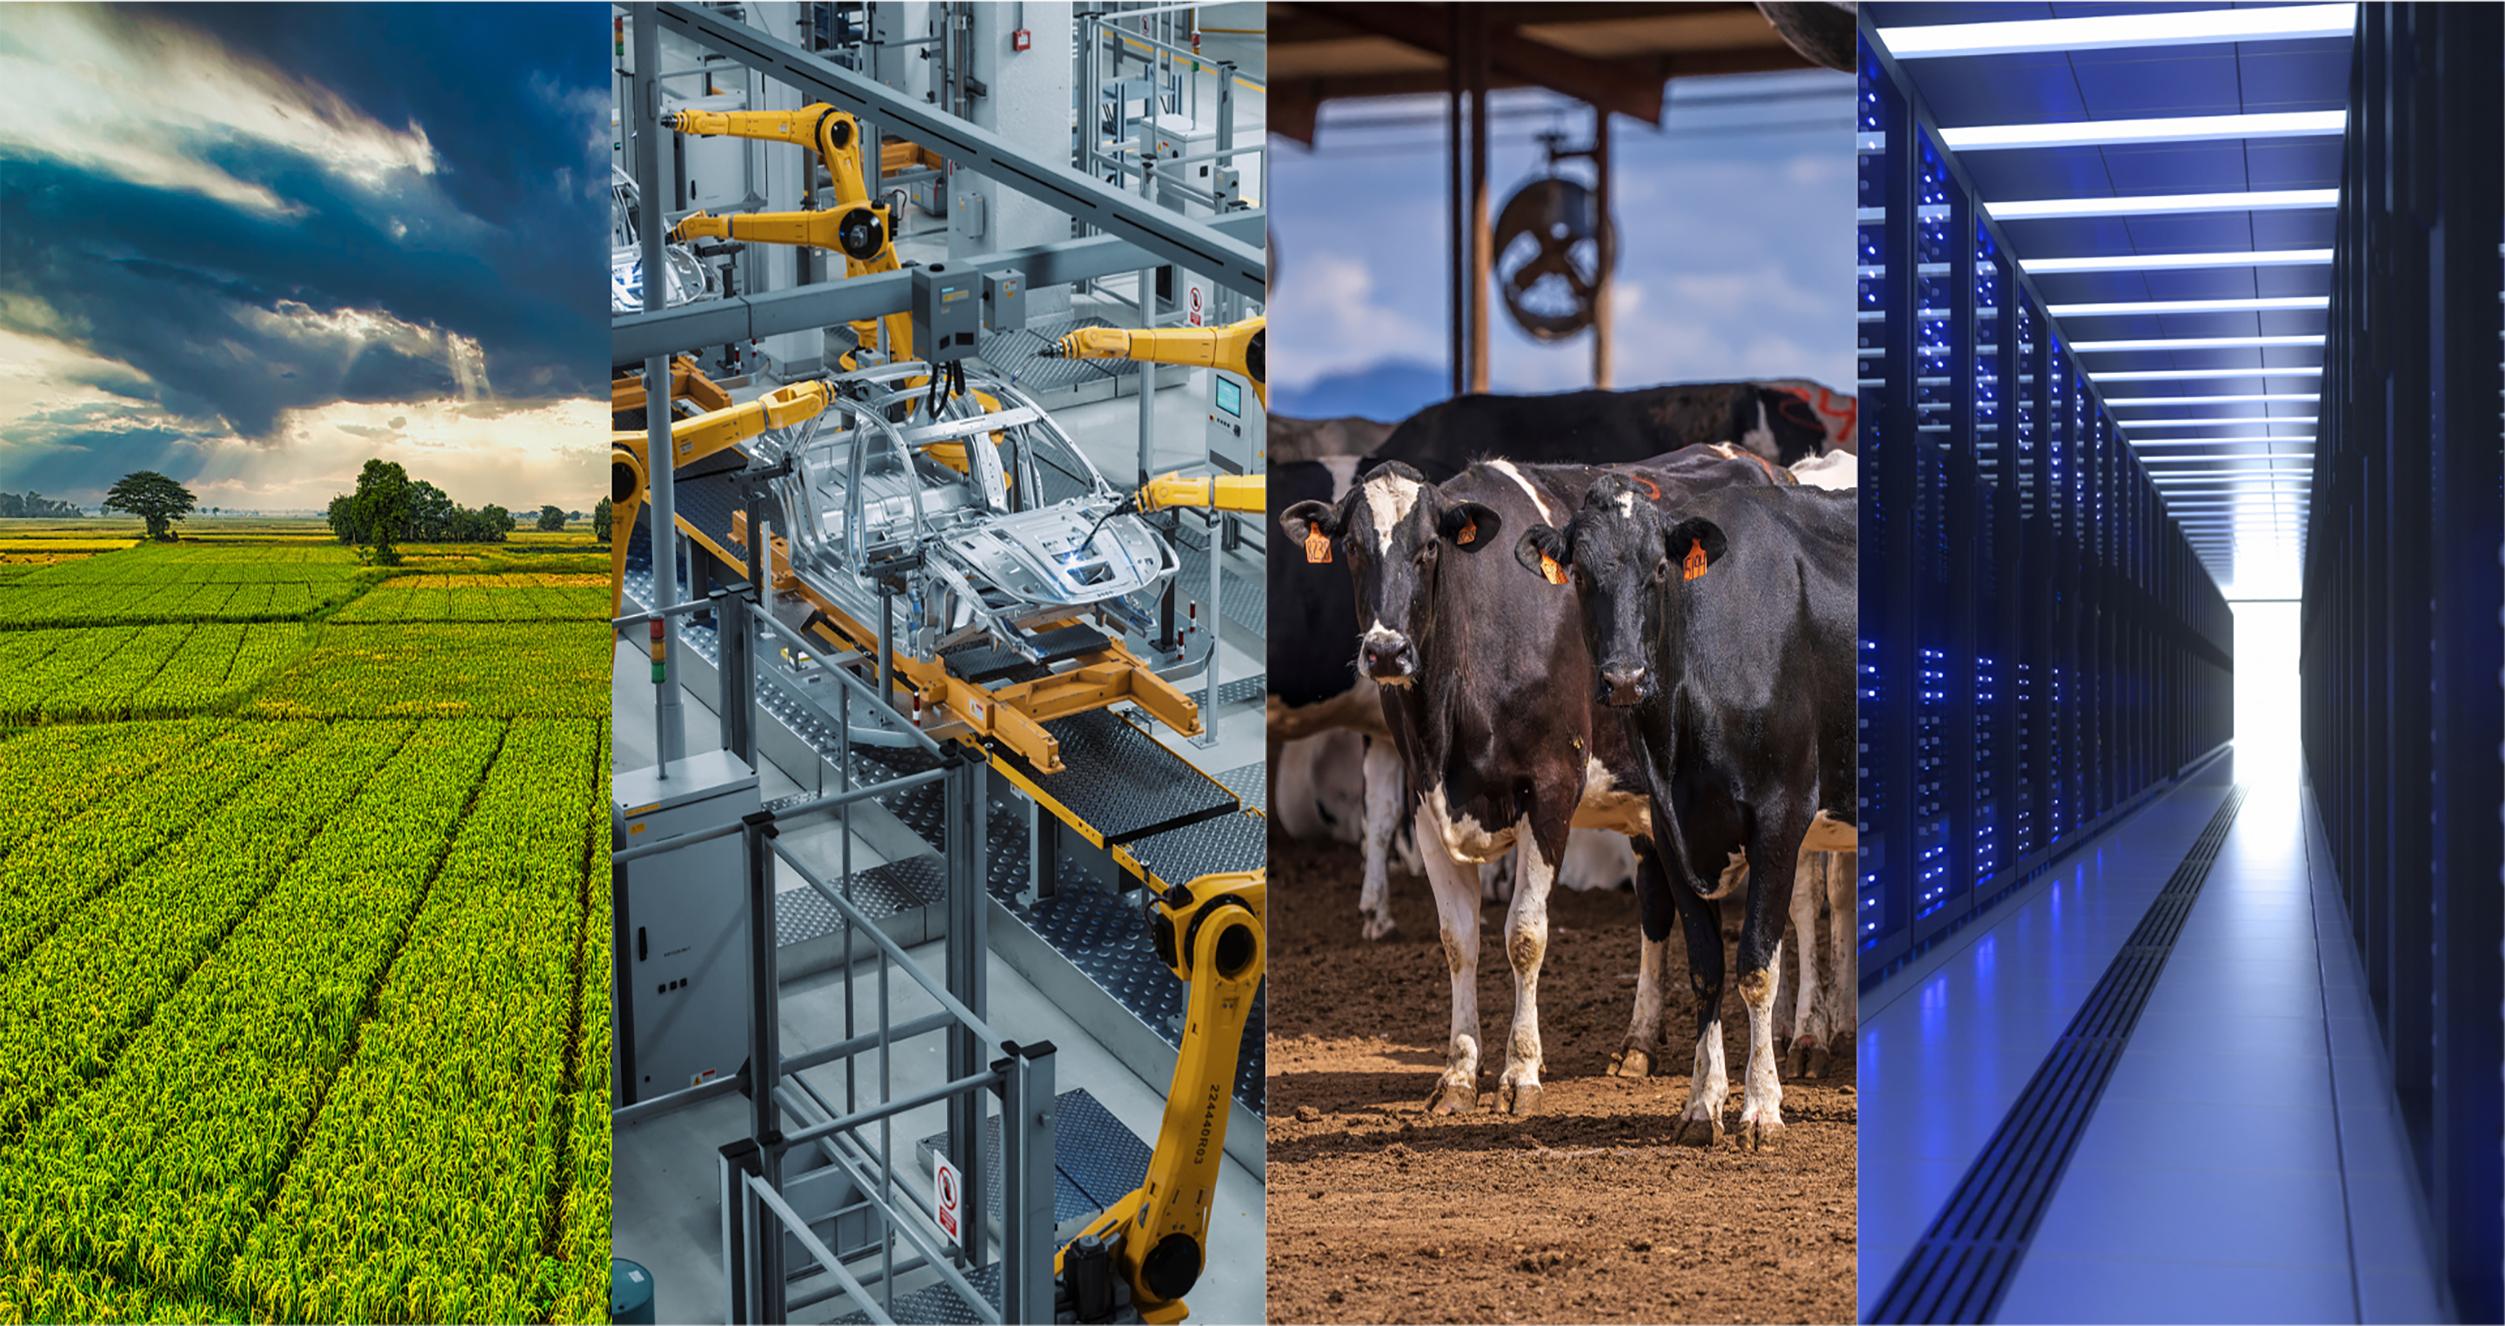 SAW: USA program image - four pictures left to right - farm field, car assembly line, cows and row of data servers